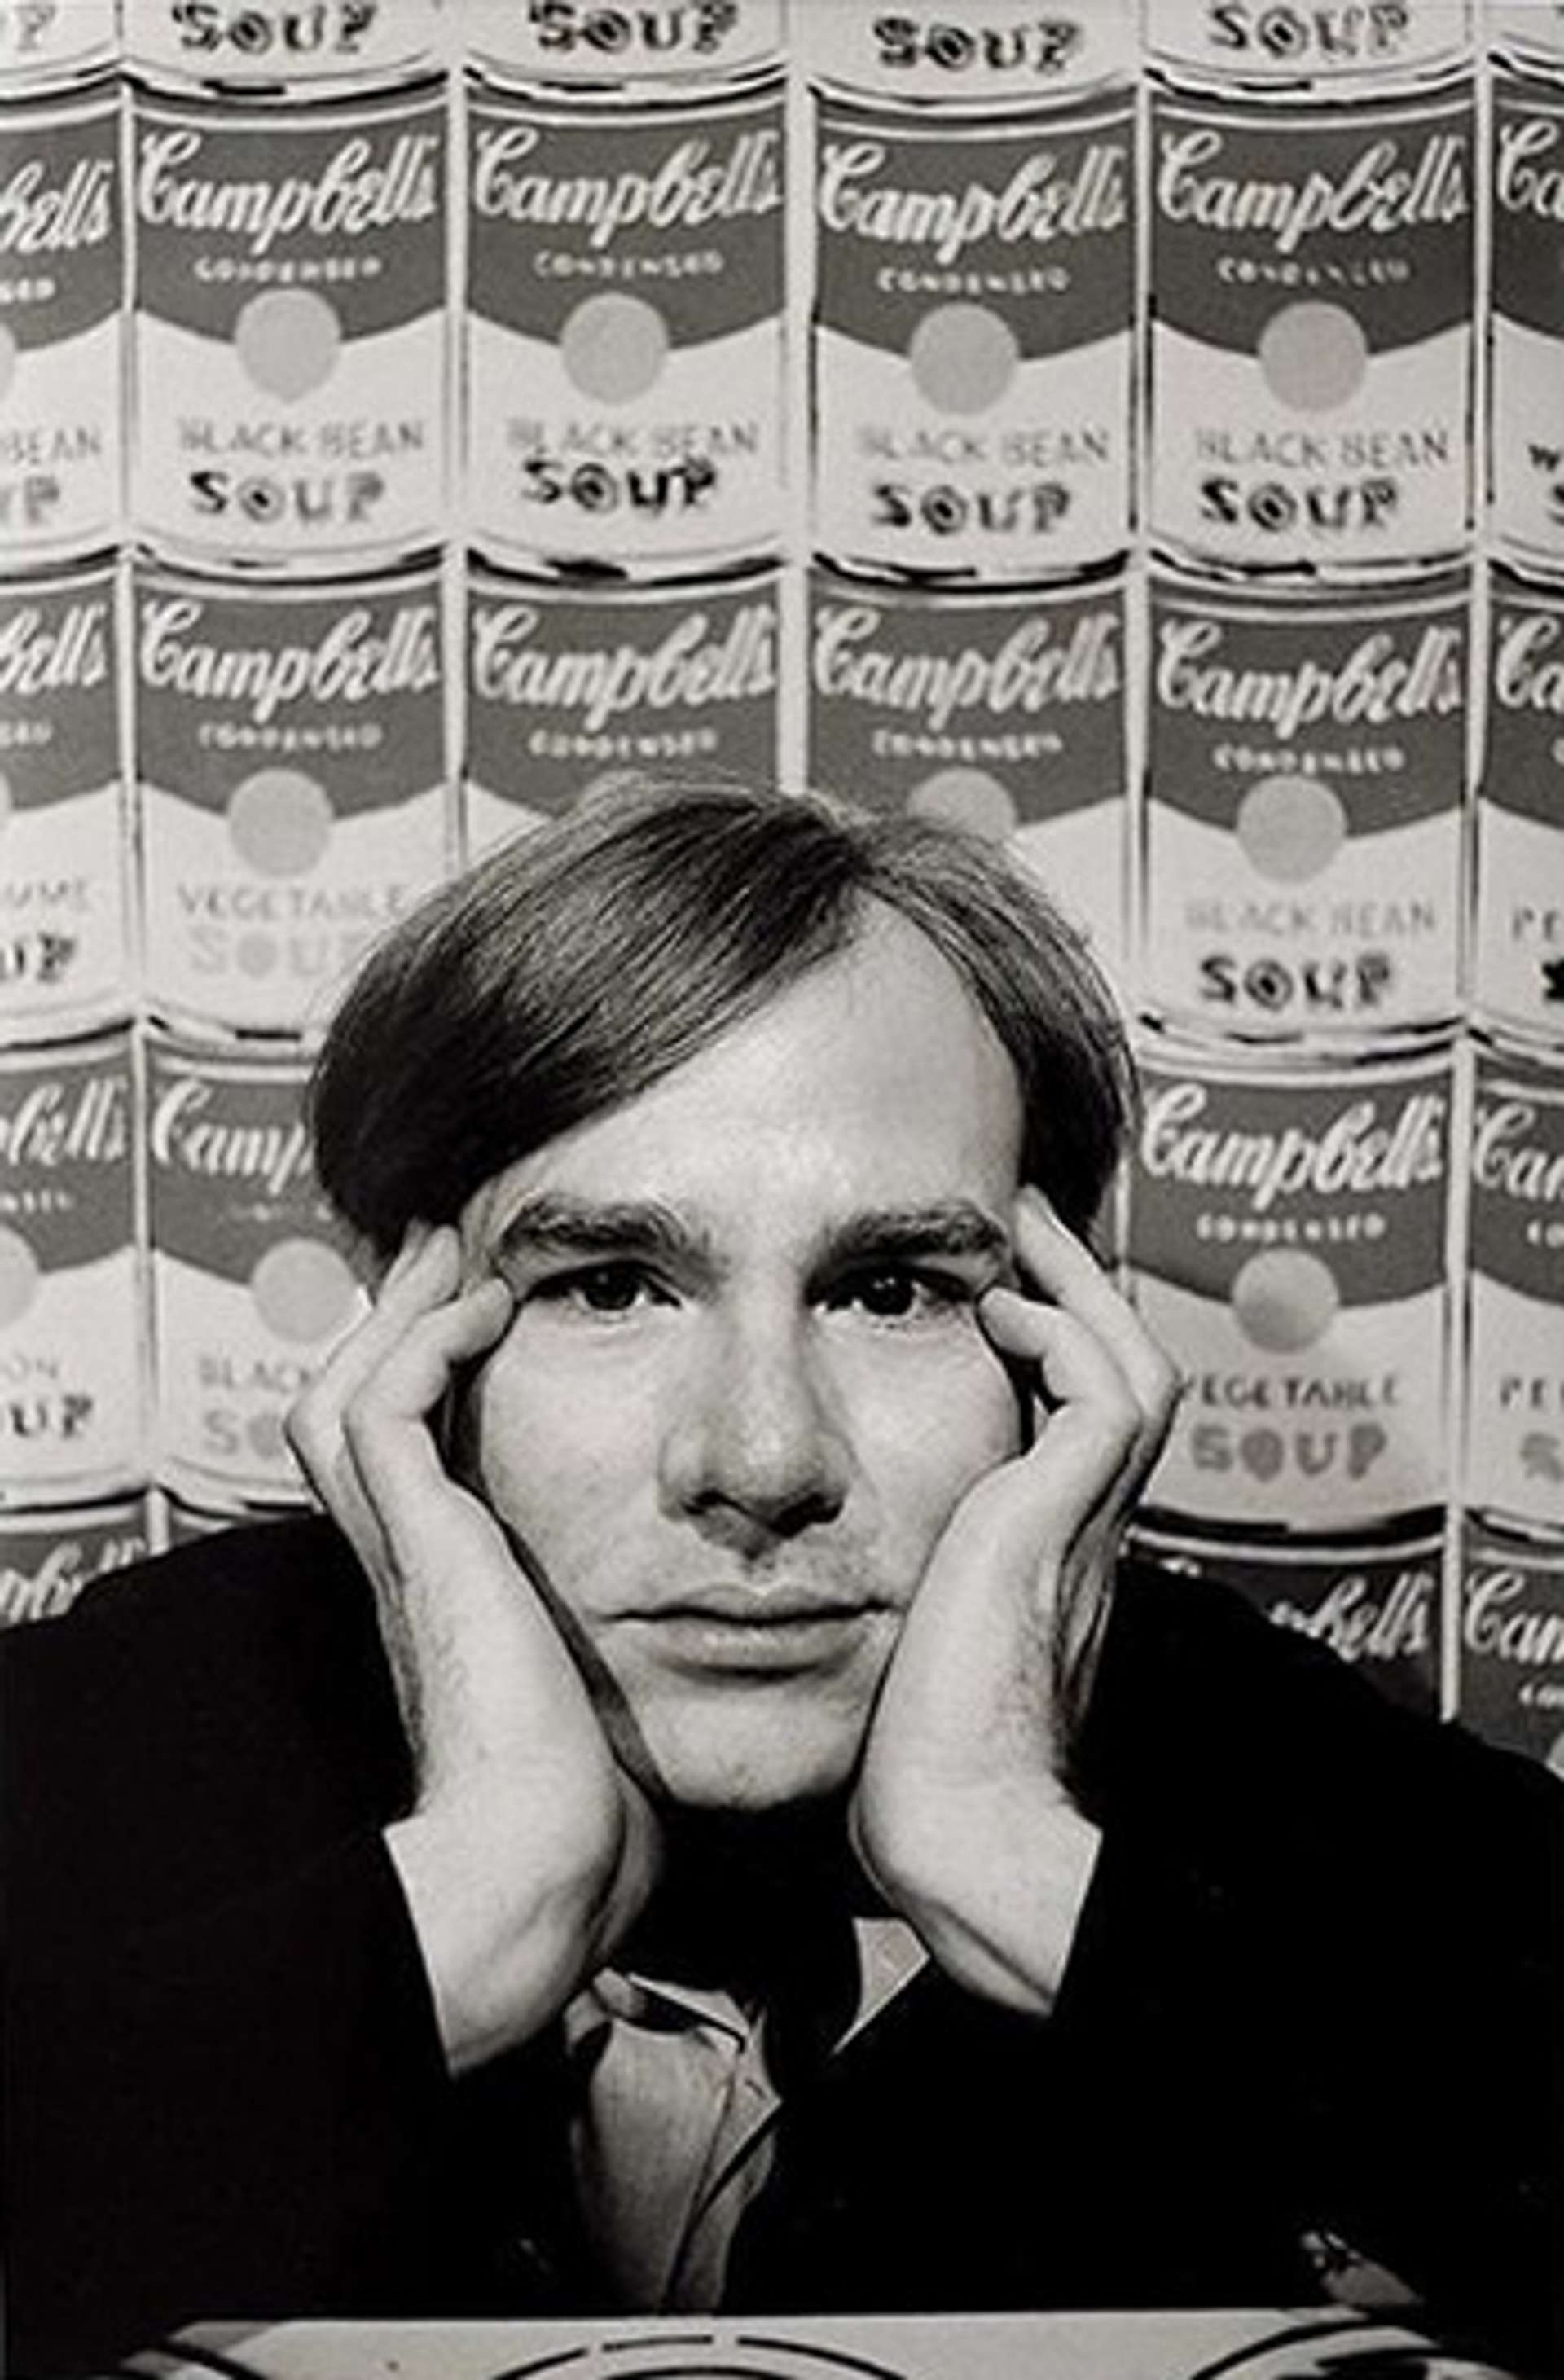 Andy Warhol and Campbell’s - MyArtBroker